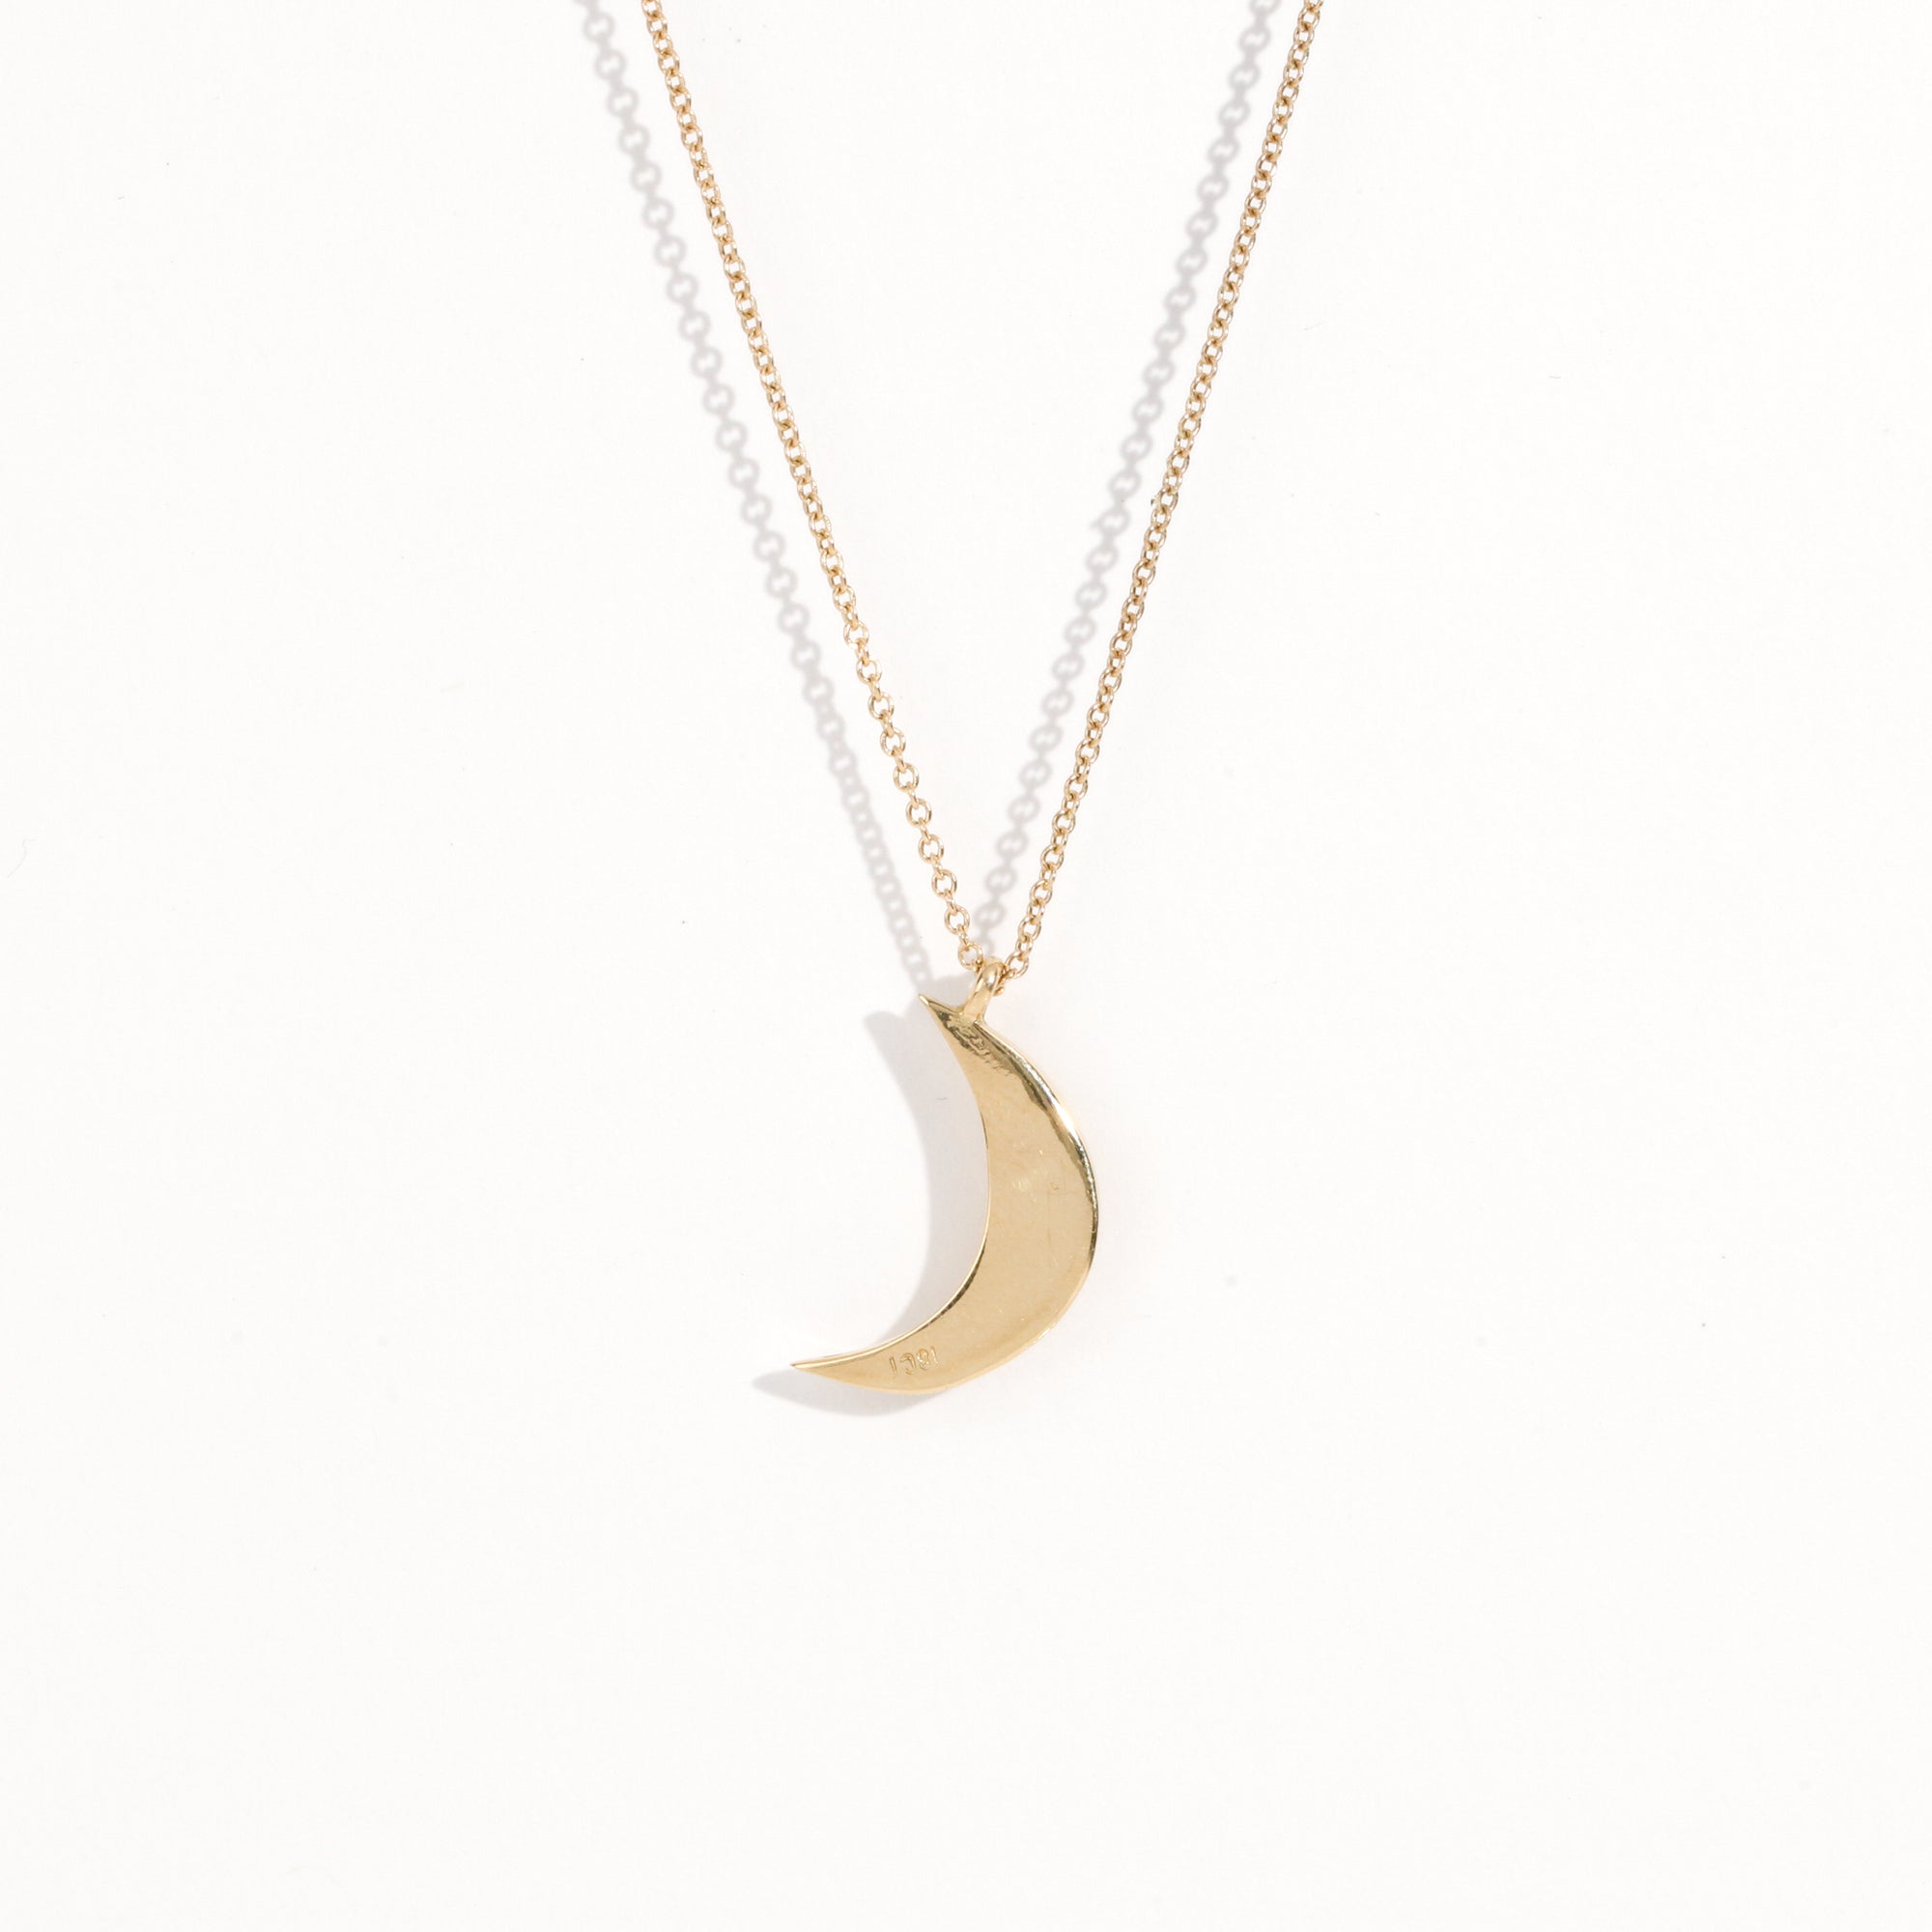 Made in Melbourne crescent moon pendant in 9ct yellow gold with diamonds star set. 